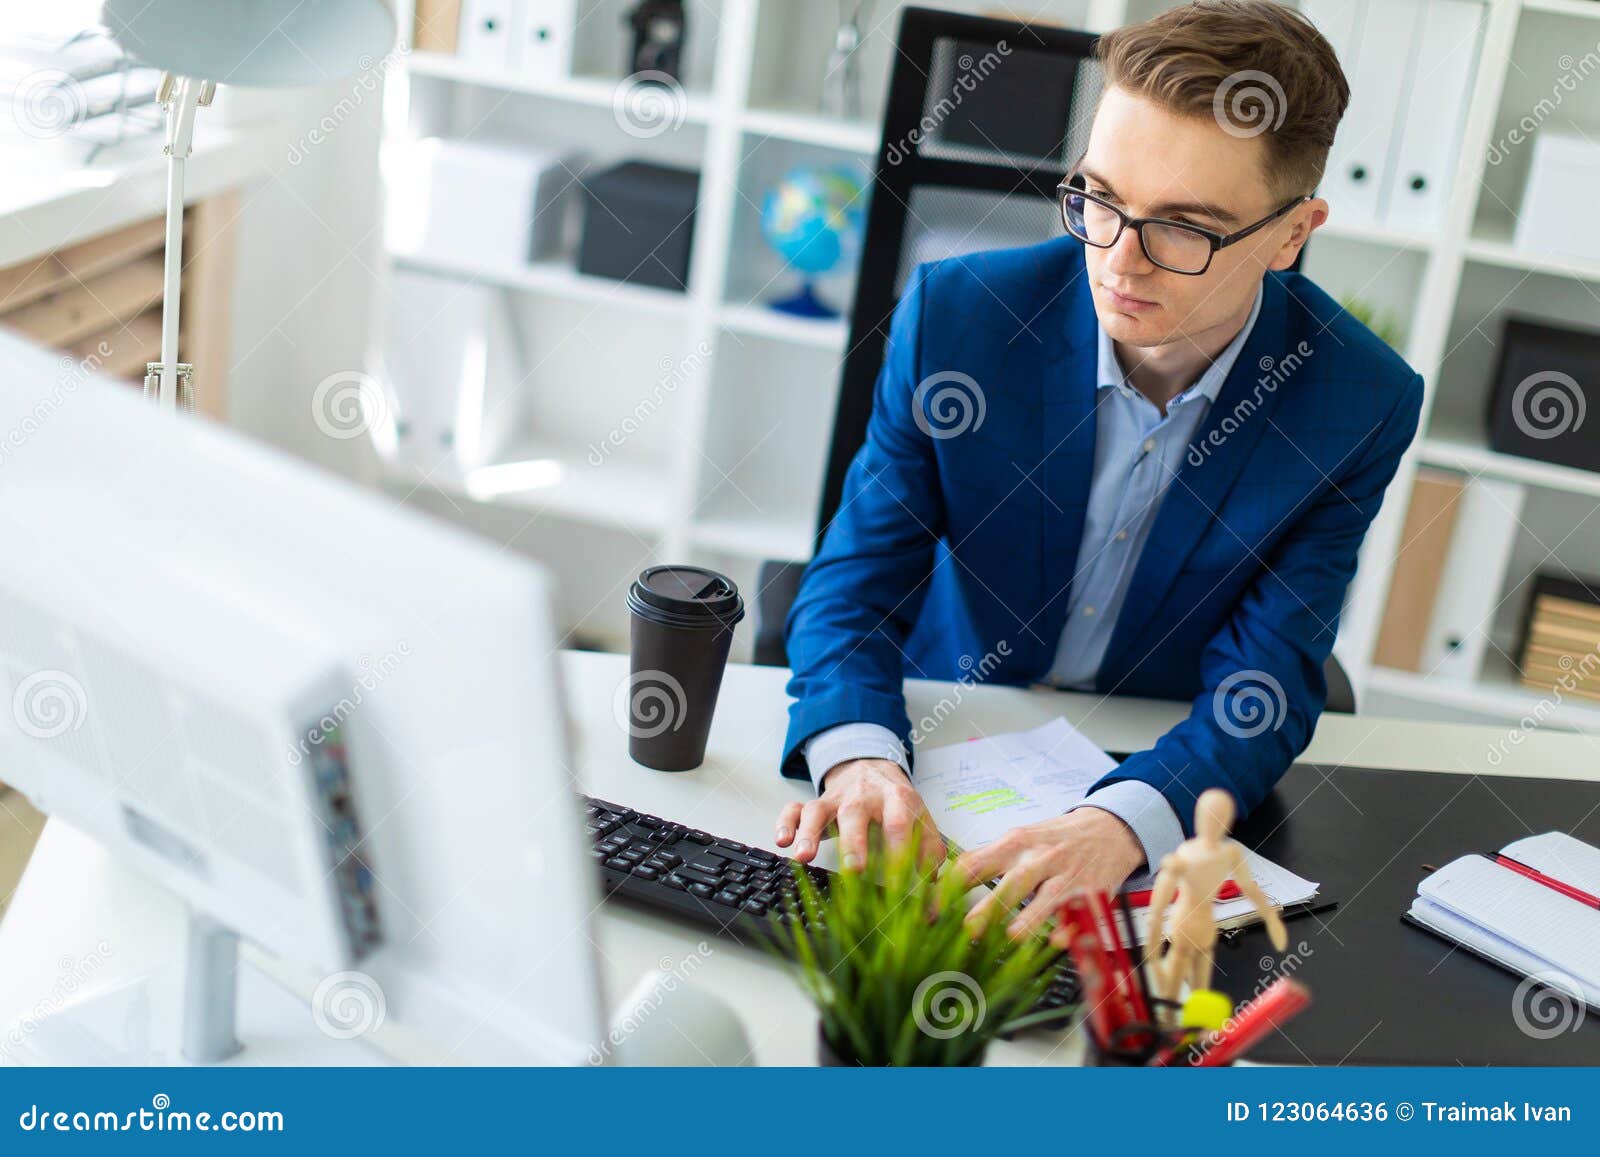 A Young Man Sits At A Table In The Office And Works With Documents